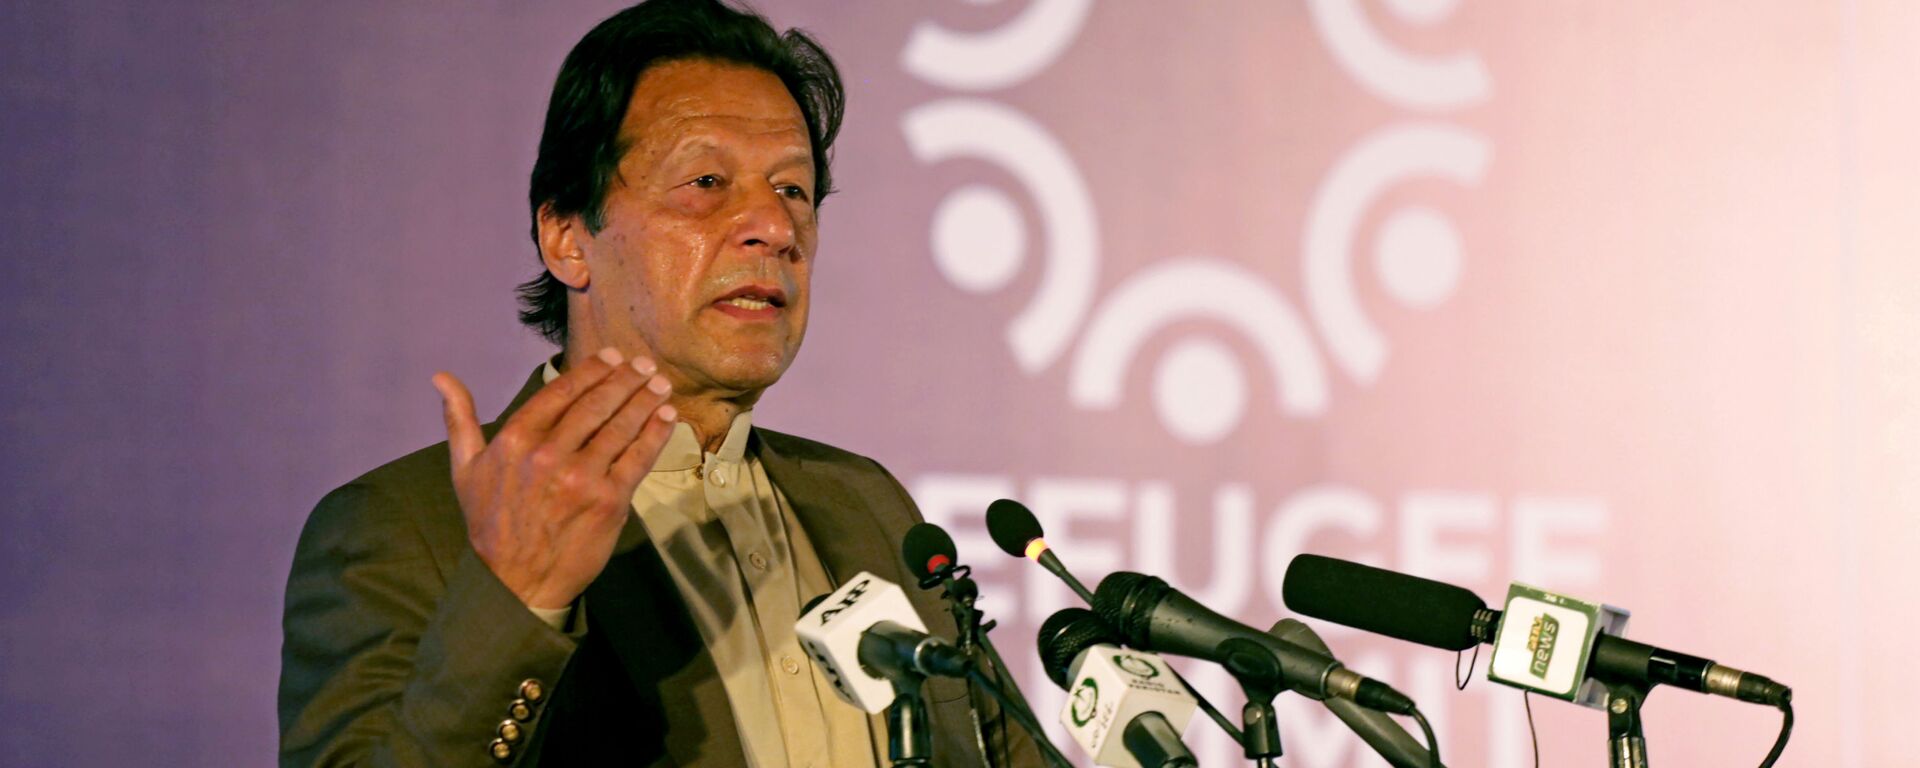 Pakistan's Prime Minister Imran Khan speaks during an international conference on the future of Afghan refugees living in Pakistan, organized by Pakistan and the UN Refugee Agency in Islamabad, Pakistan February 17, 2020 - Sputnik International, 1920, 26.06.2020